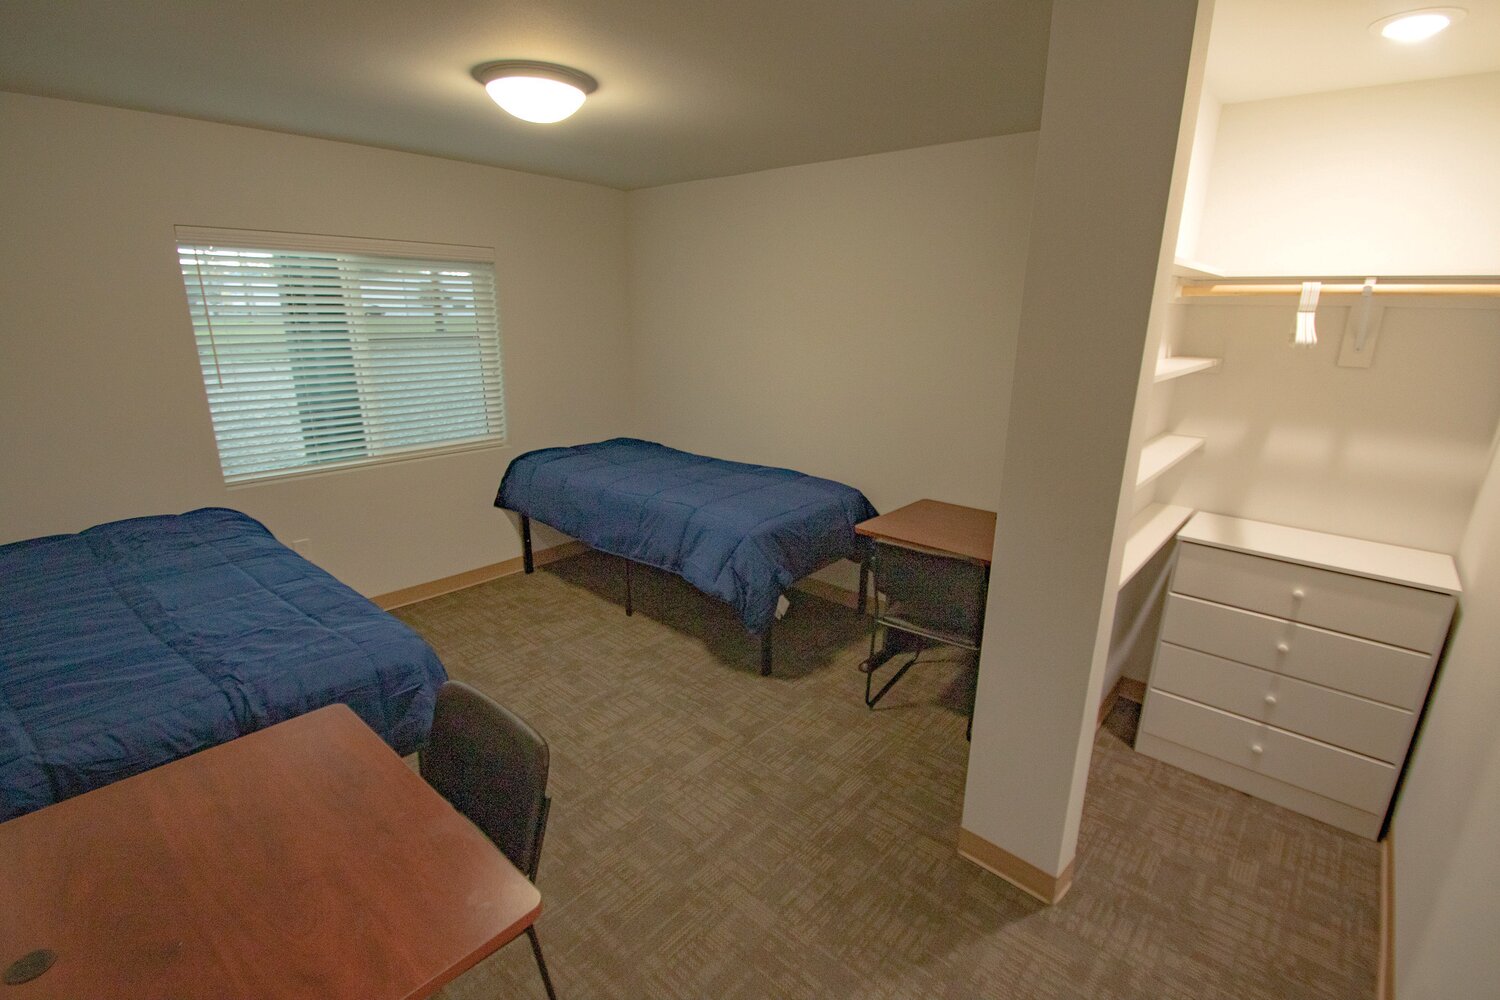 The inside of a room for Centralia College students at the new CHI apartments is pictured on Tuesday, Nov. 7.